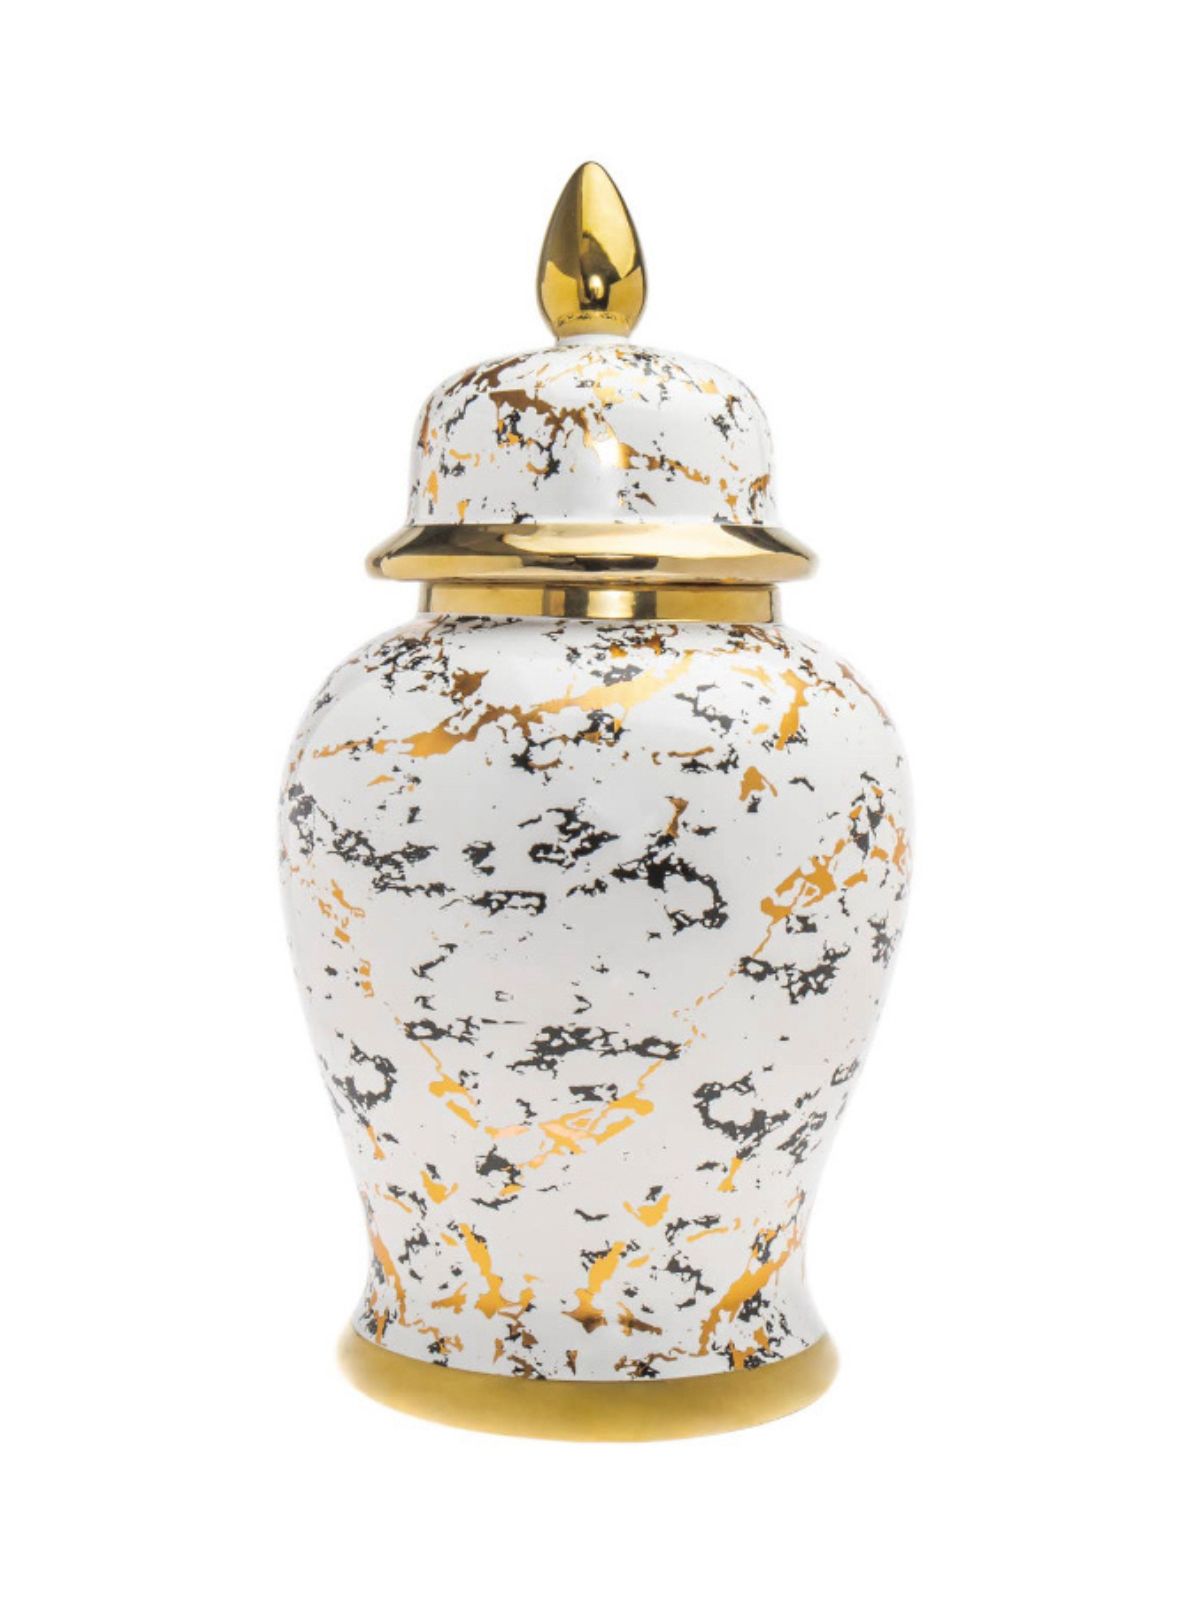 Marble Print Porcelain Ginger Jar with and elegant gold-tone rim and base in size small